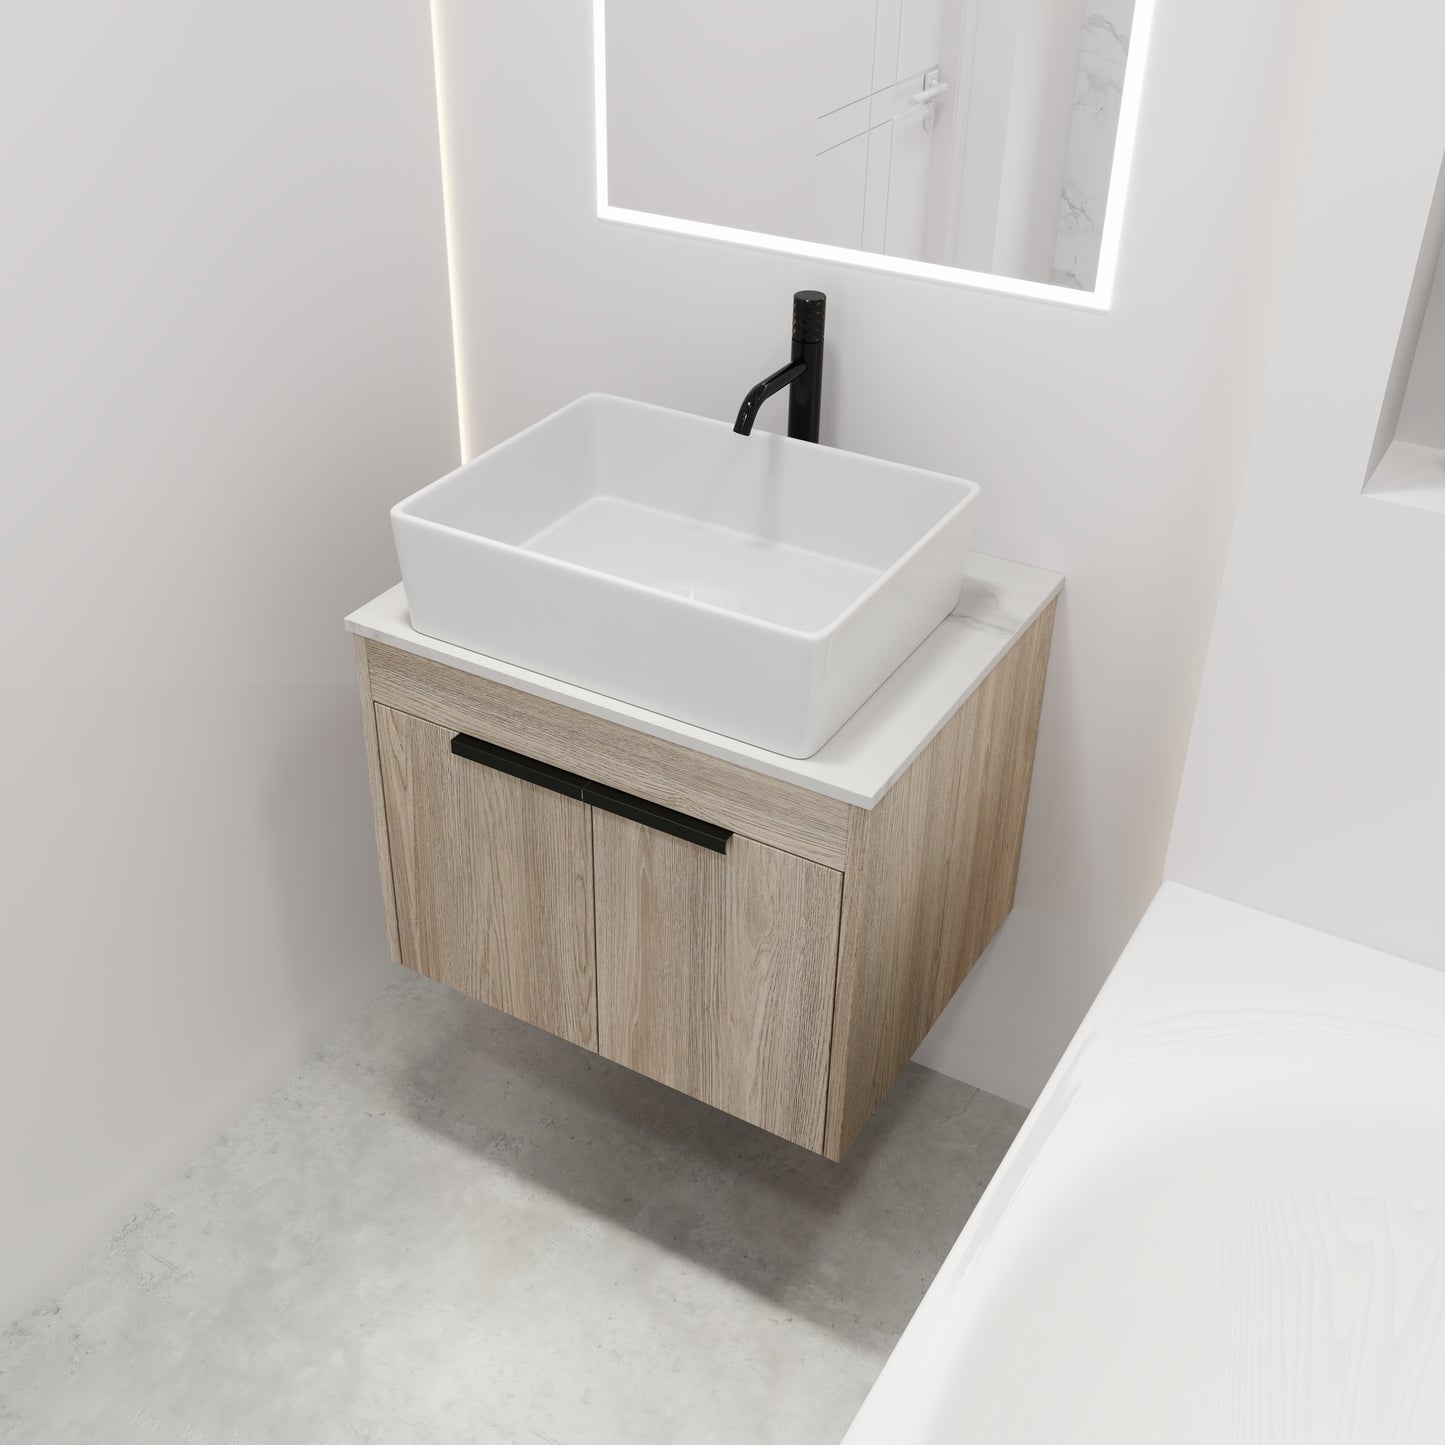 24 " Modern Design Float Bathroom Vanity With Ceramic Basin Set,  Wall Mounted White Oak Vanity  With Soft Close Door,KD-Packing，KD-Packing，2 Pieces Parcel（TOP-BAB110MOWH）